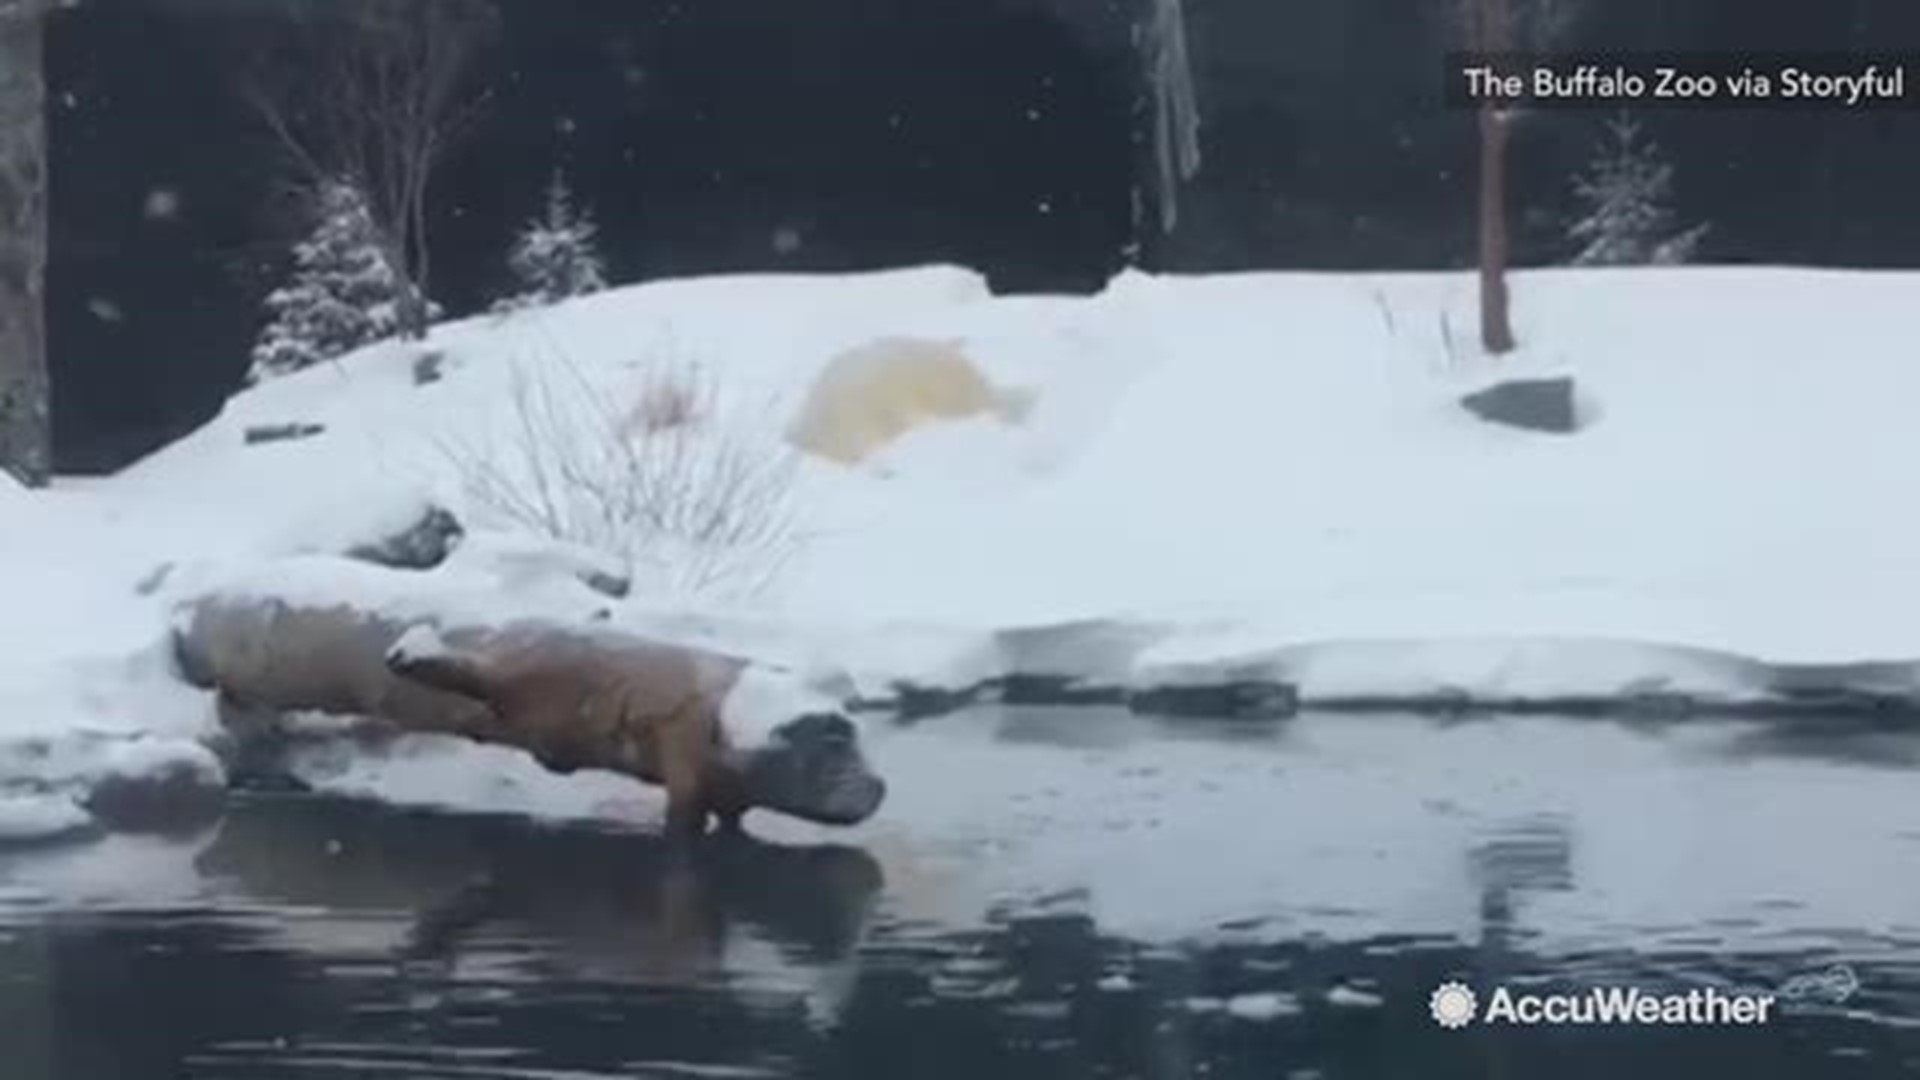 Sakari, a polar bear, was excited as snow blanketed the Buffalo Zoo on January 20. The snow was apart of a winter storm which dropped more than a foot of snow in some parts of New York.